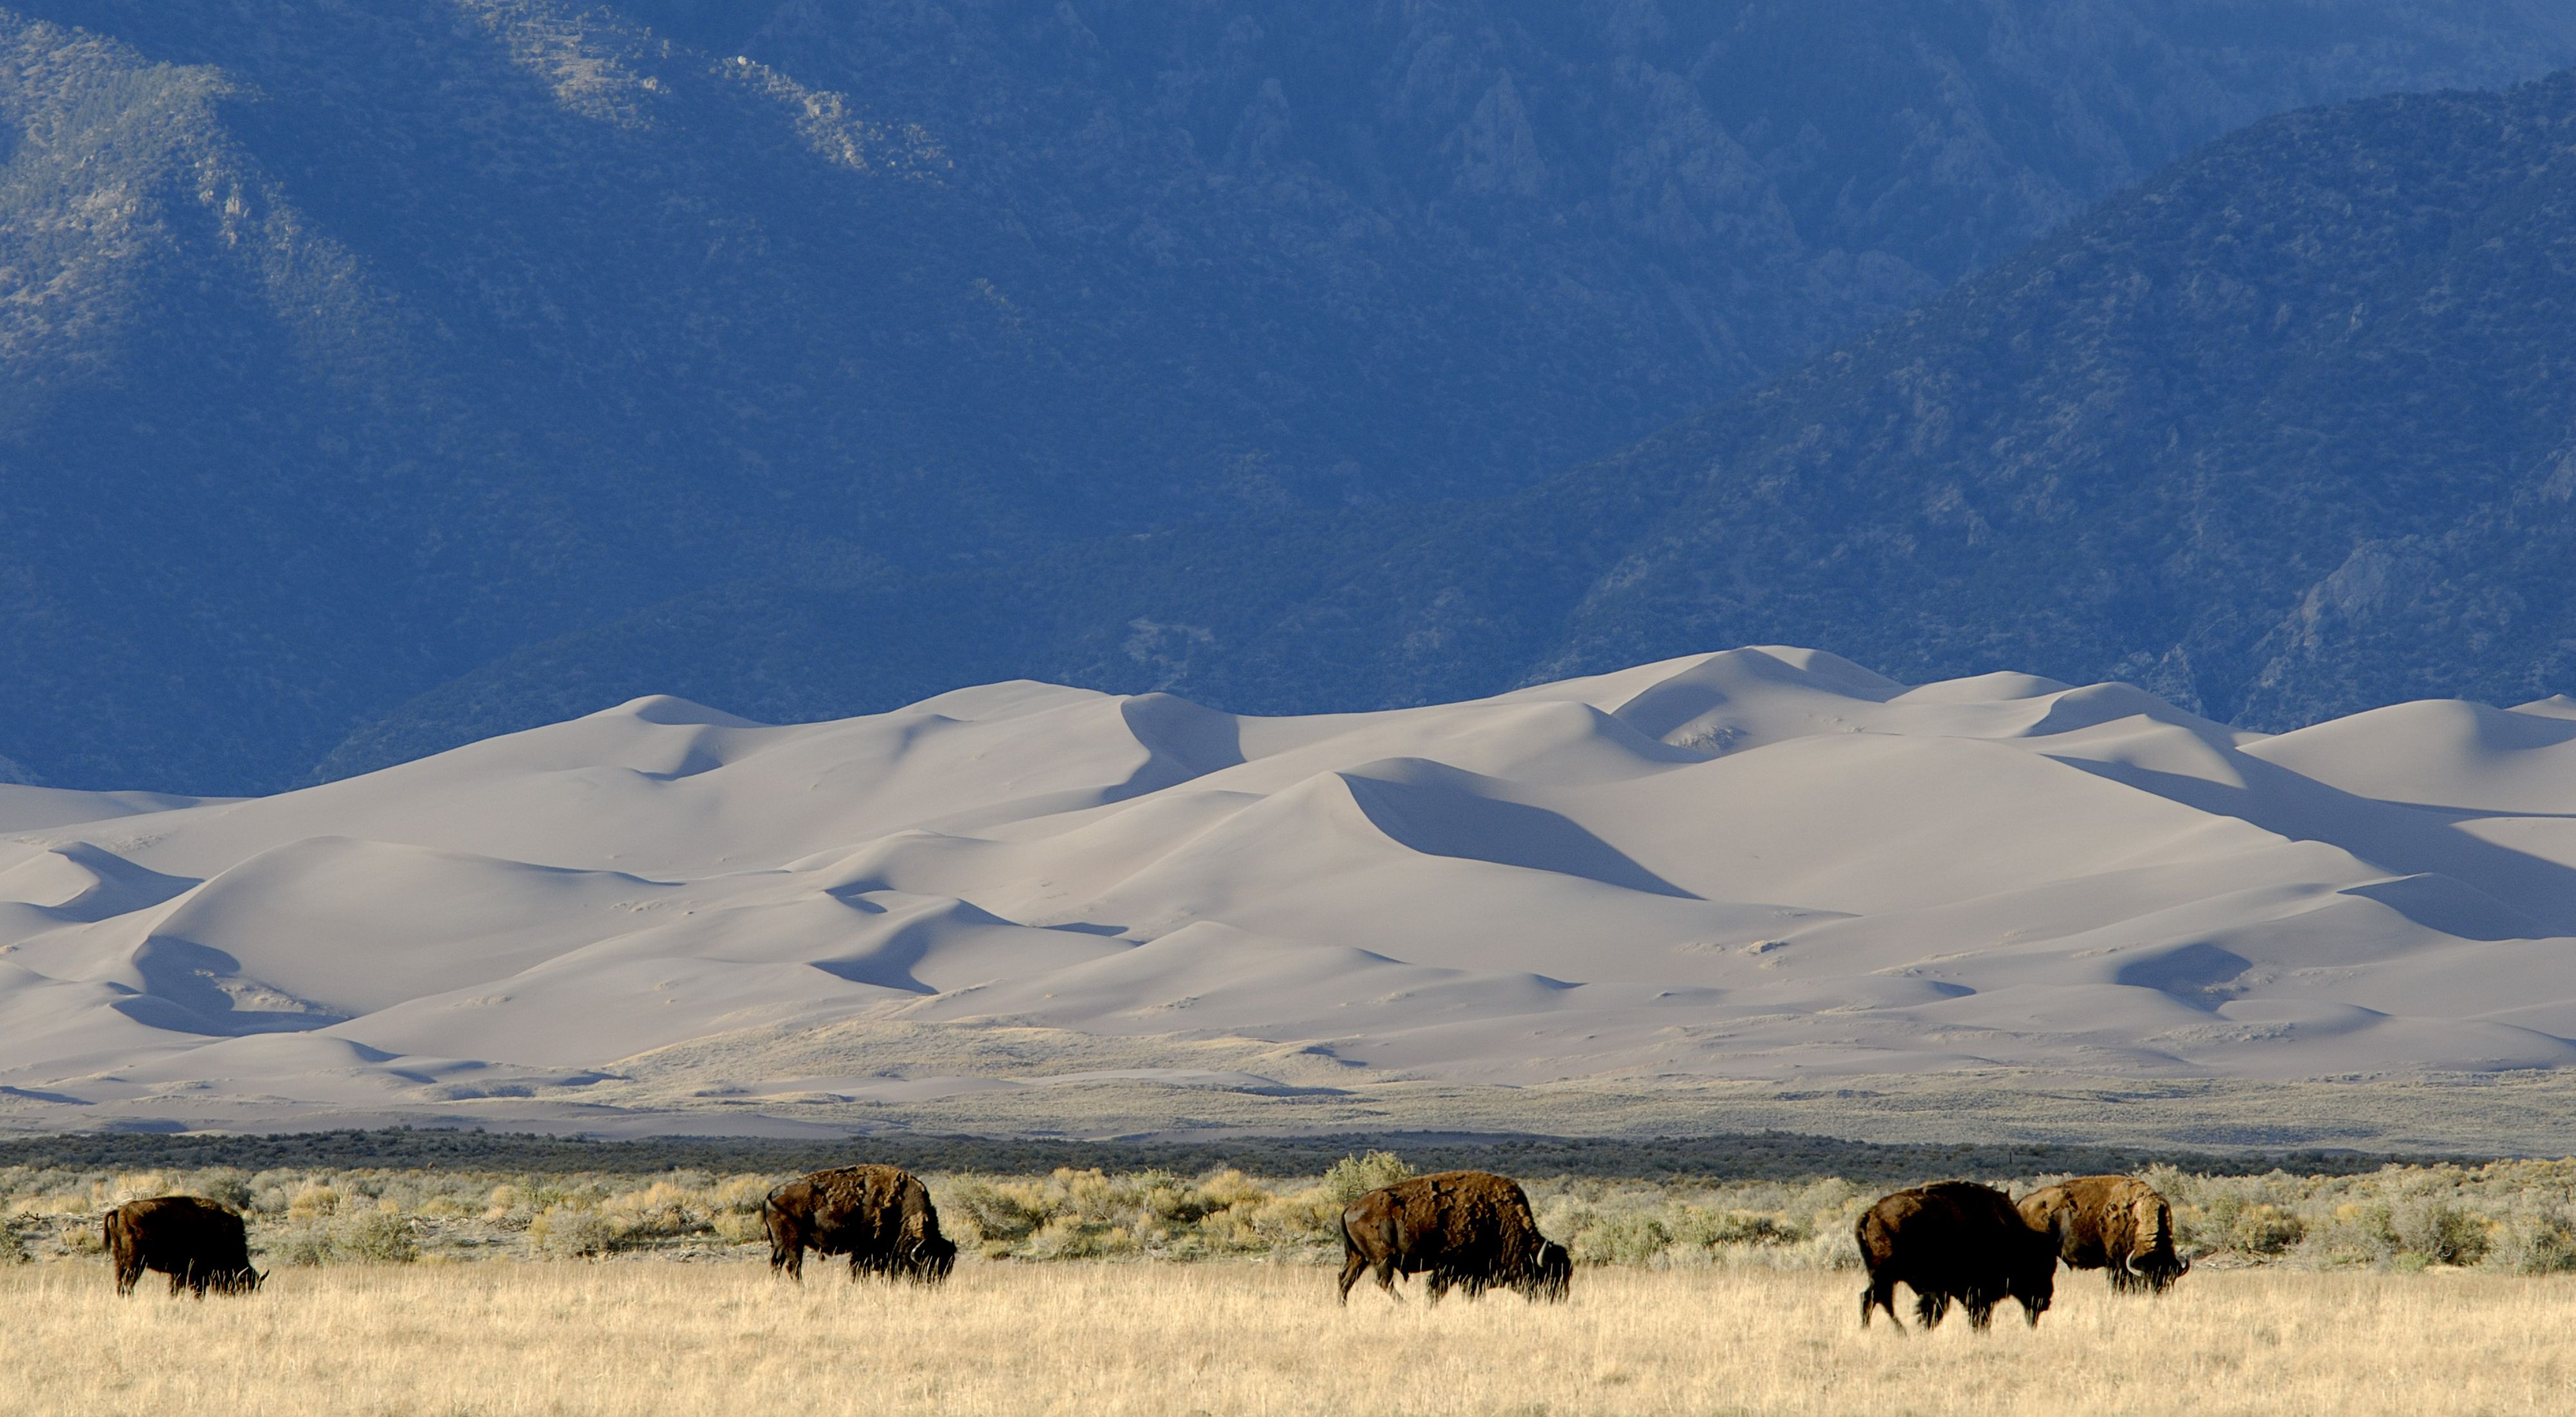 Buffalo herd standing in a grassland against a backdrop of towering sand dunes.